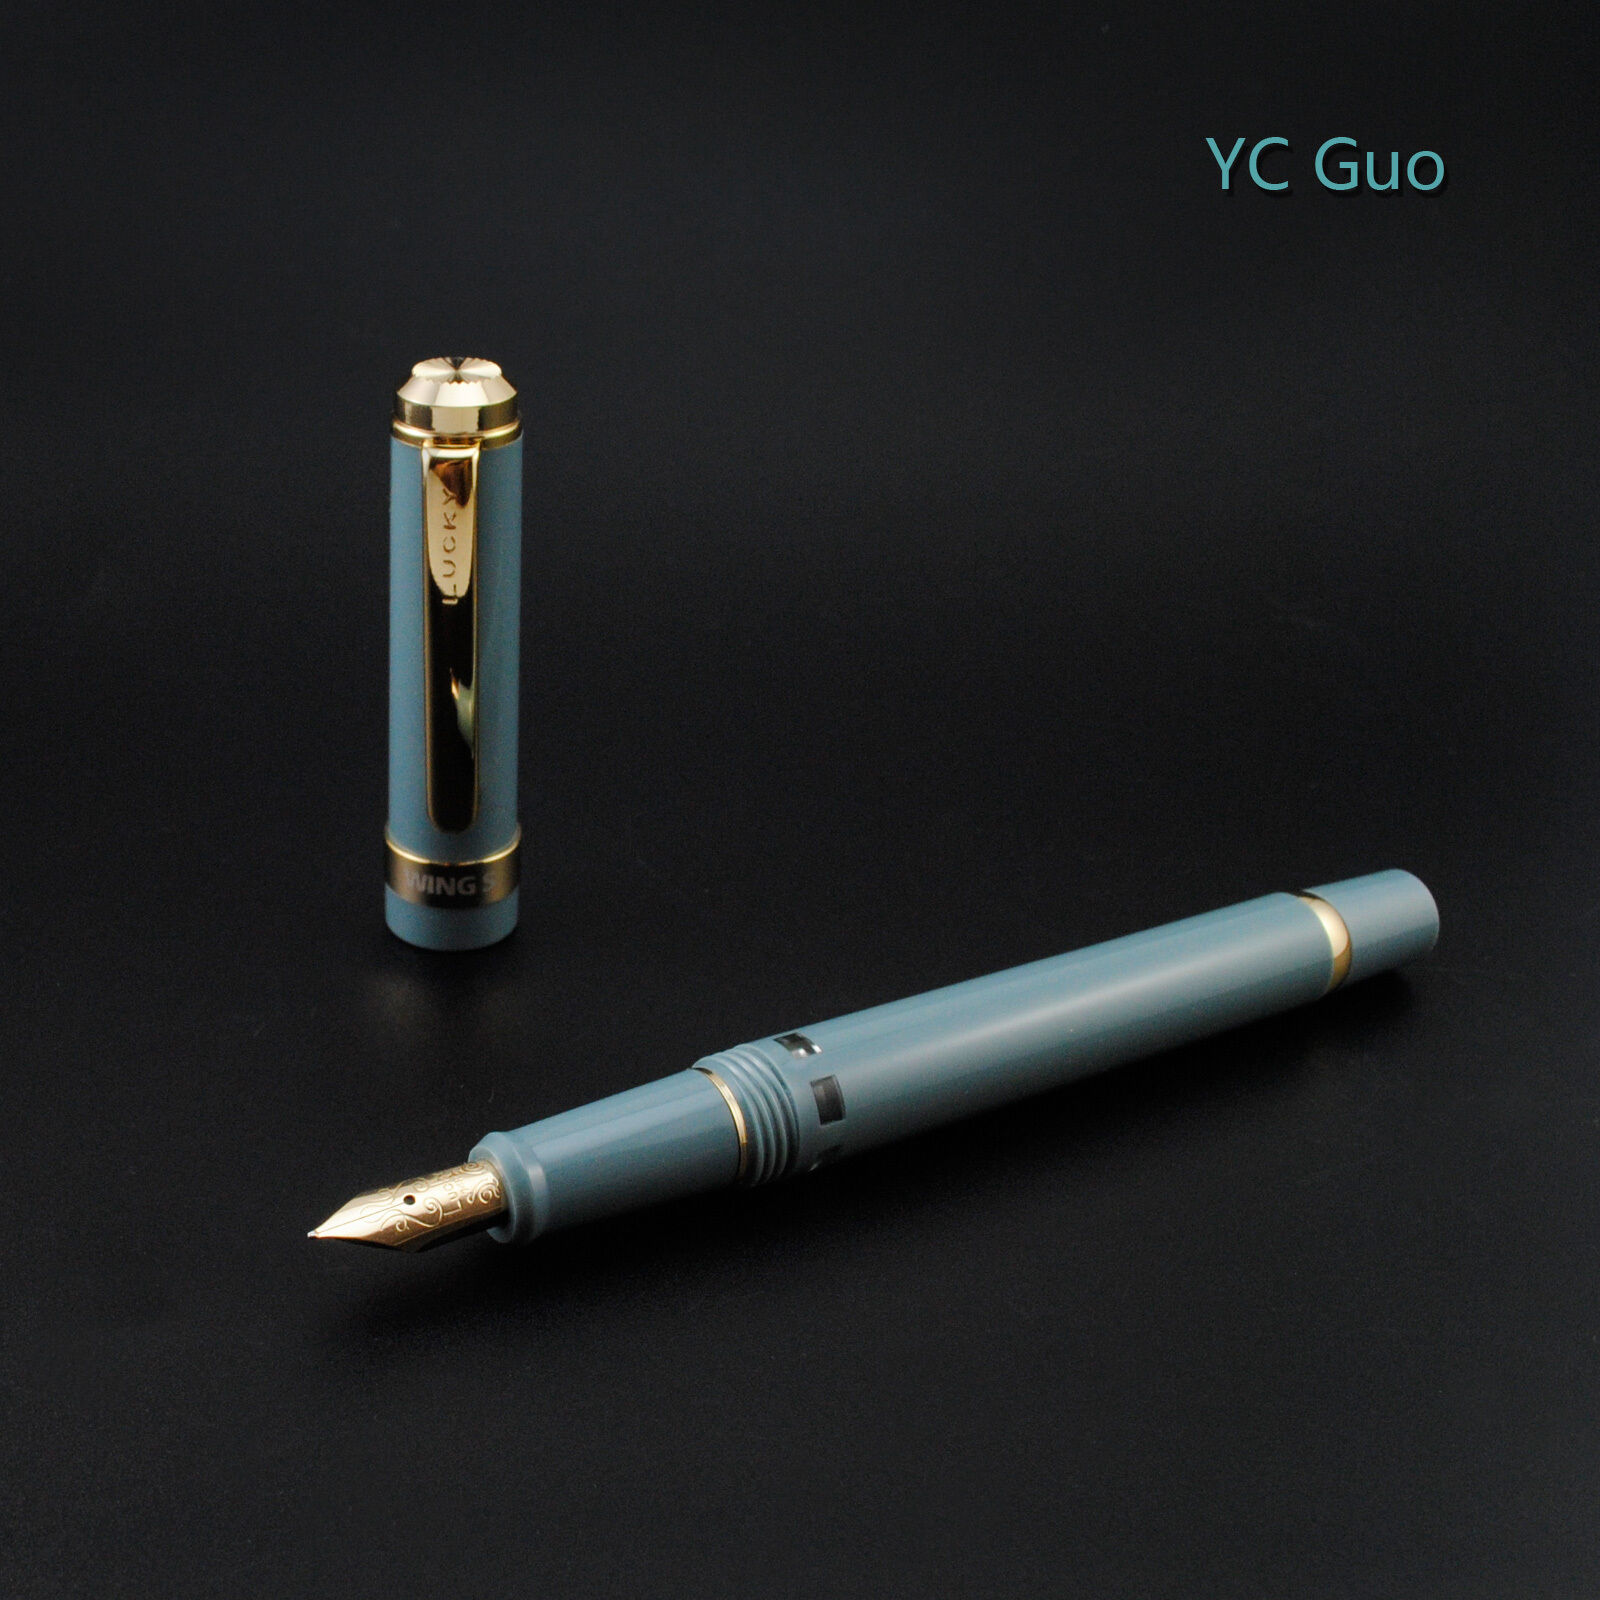 2017 Wing Sung 698 Piston 14K Gold Pen Teal Golden Clip Fine Nib Without Box 